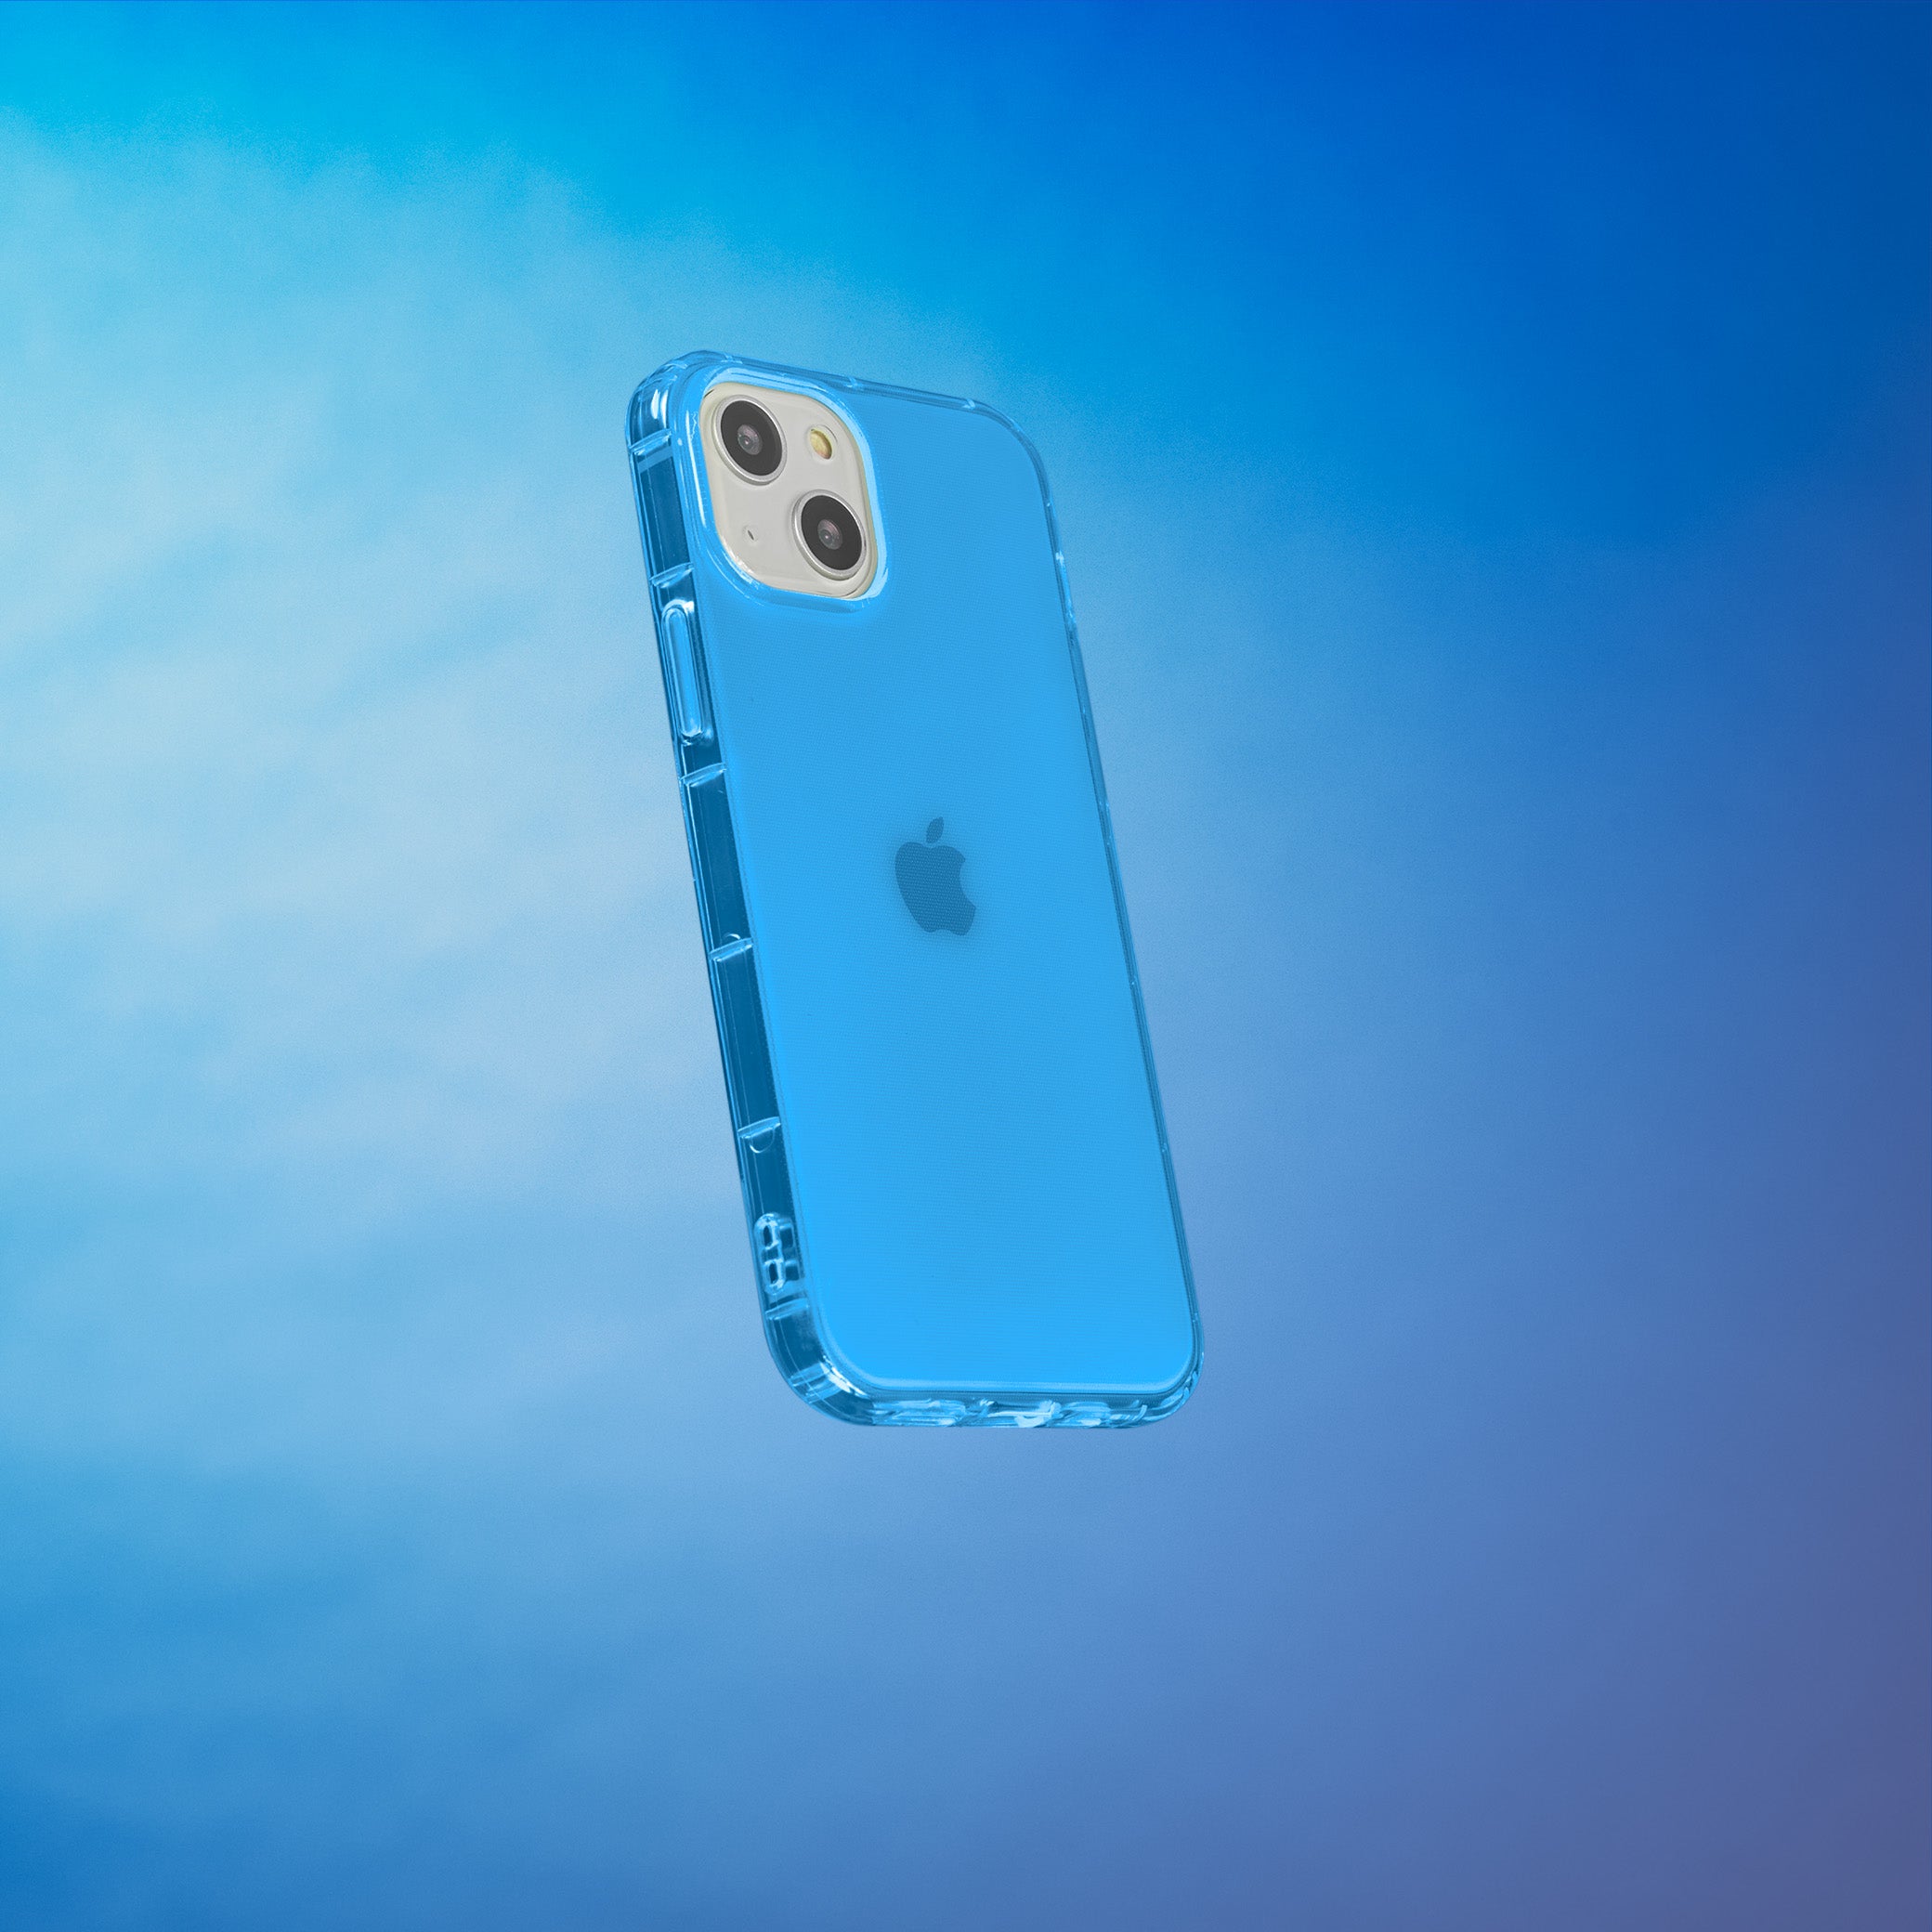 Highlighter Case for iPhone 13 - Elevated Azure Blue